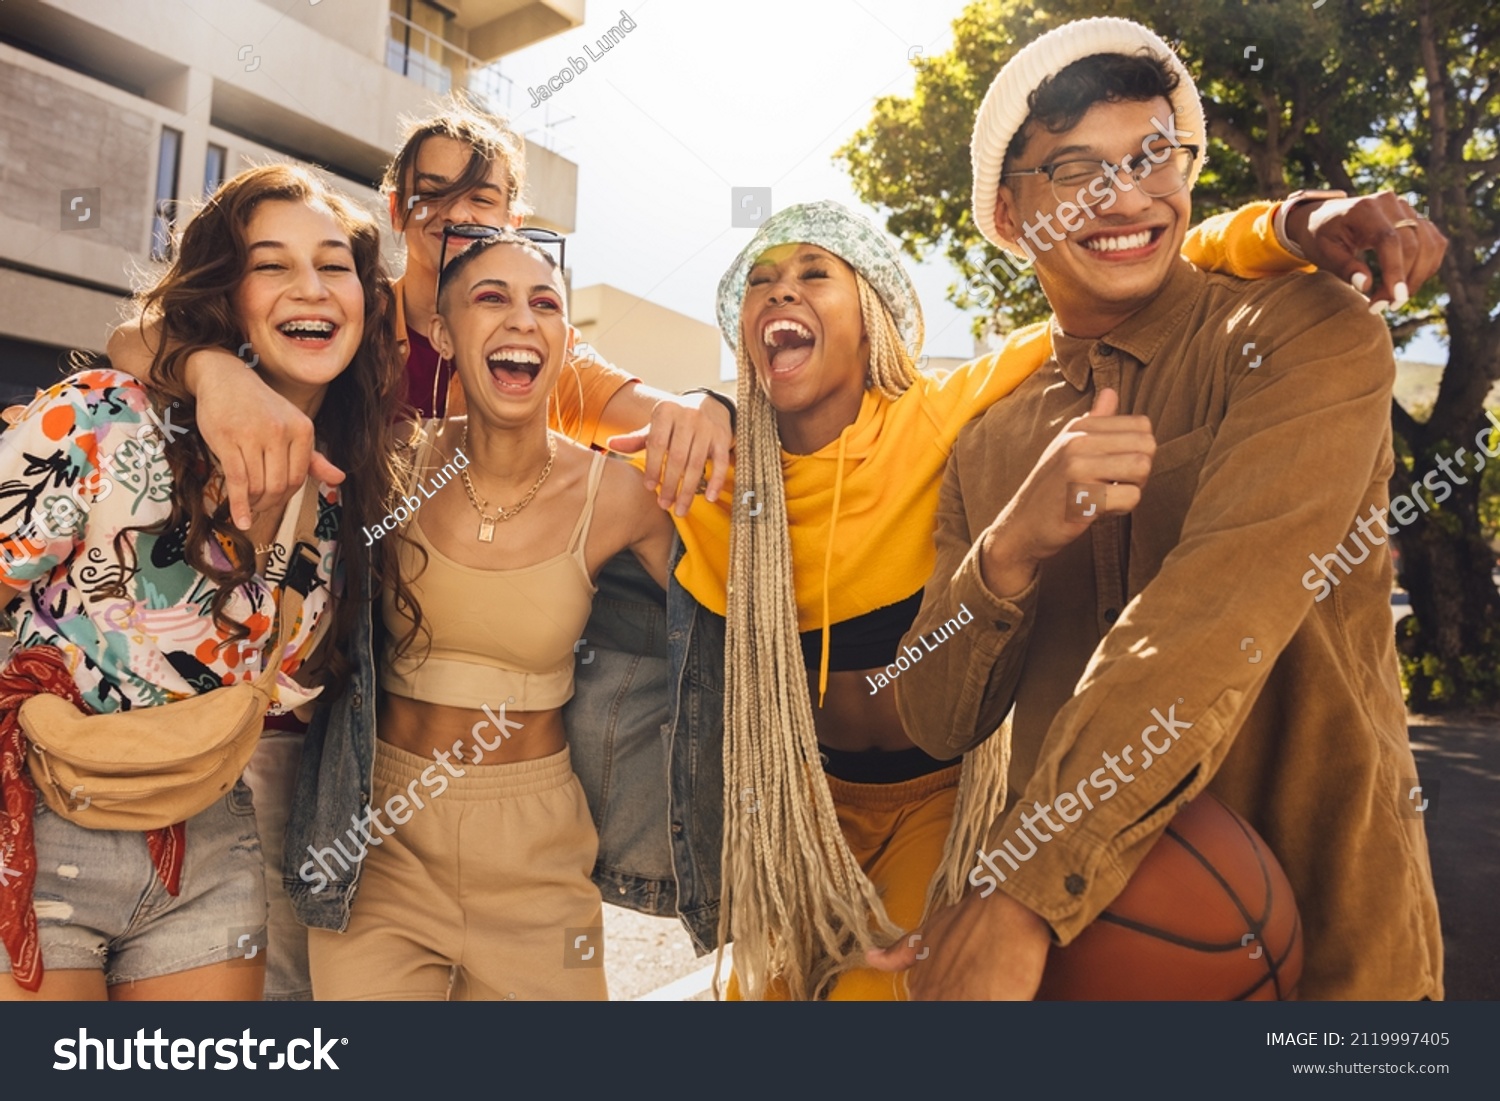 Group of generation z friends laughing together outdoors. Cheerful young friends embracing each other in the summer sun. Youngsters having fun and enjoying their youth. #2119997405